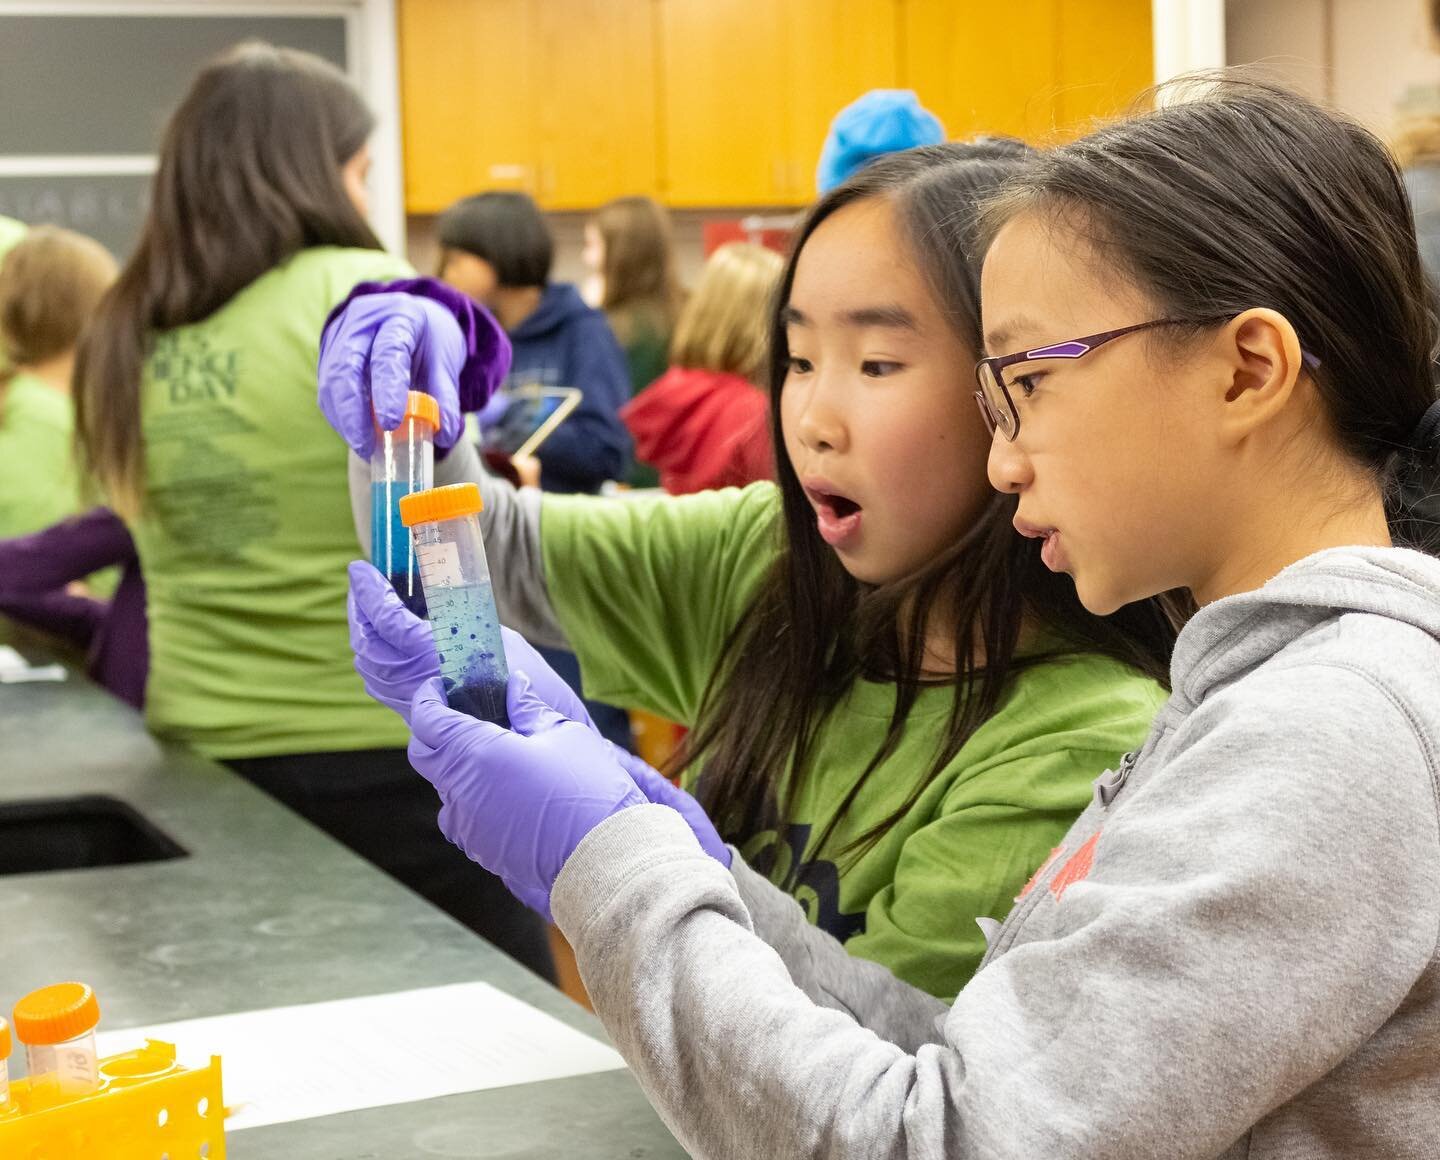 Happy women in science day ! 
We are so excited to announce Girls Science Day spring 2020 is taking place April 18th 2020 at Columbia University ! 🥰 🧪🧬🦠🔭🧫👩🏻&zwj;🔬